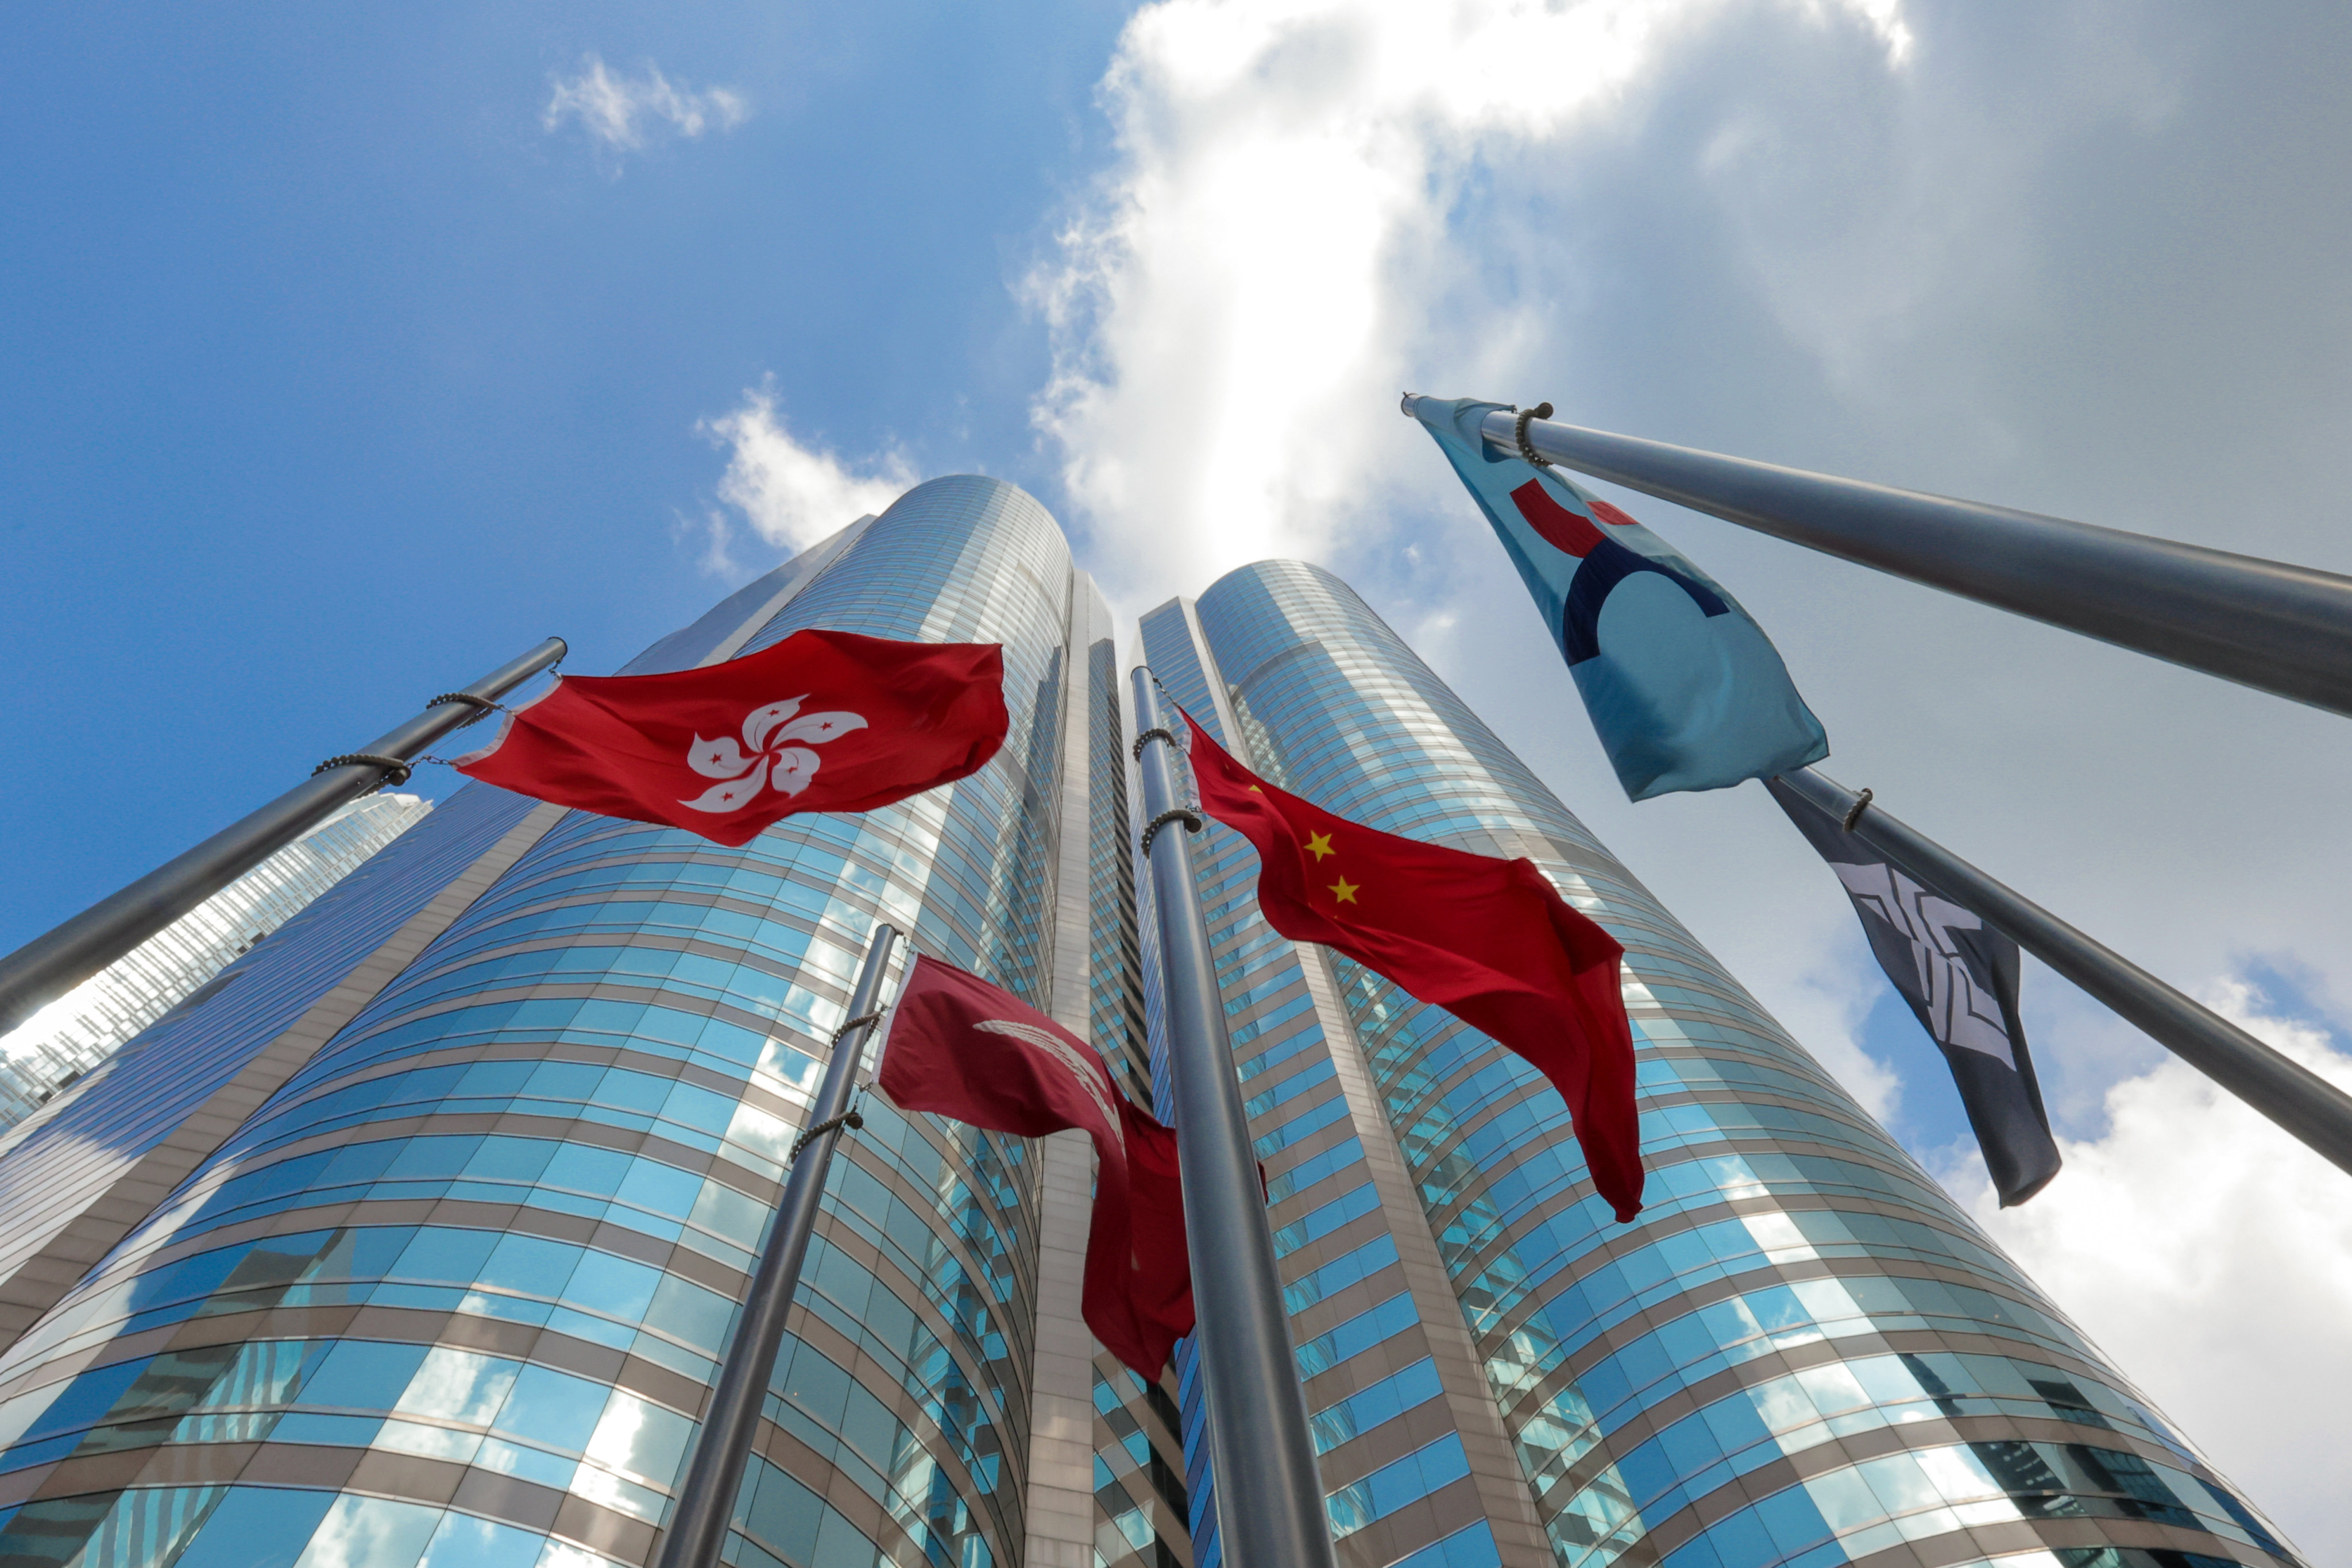 Flags are raised outside the Hong Kong Exchange Square building in Hong Kong, home of the city’s stock exchange. Photo: Jelly Tse